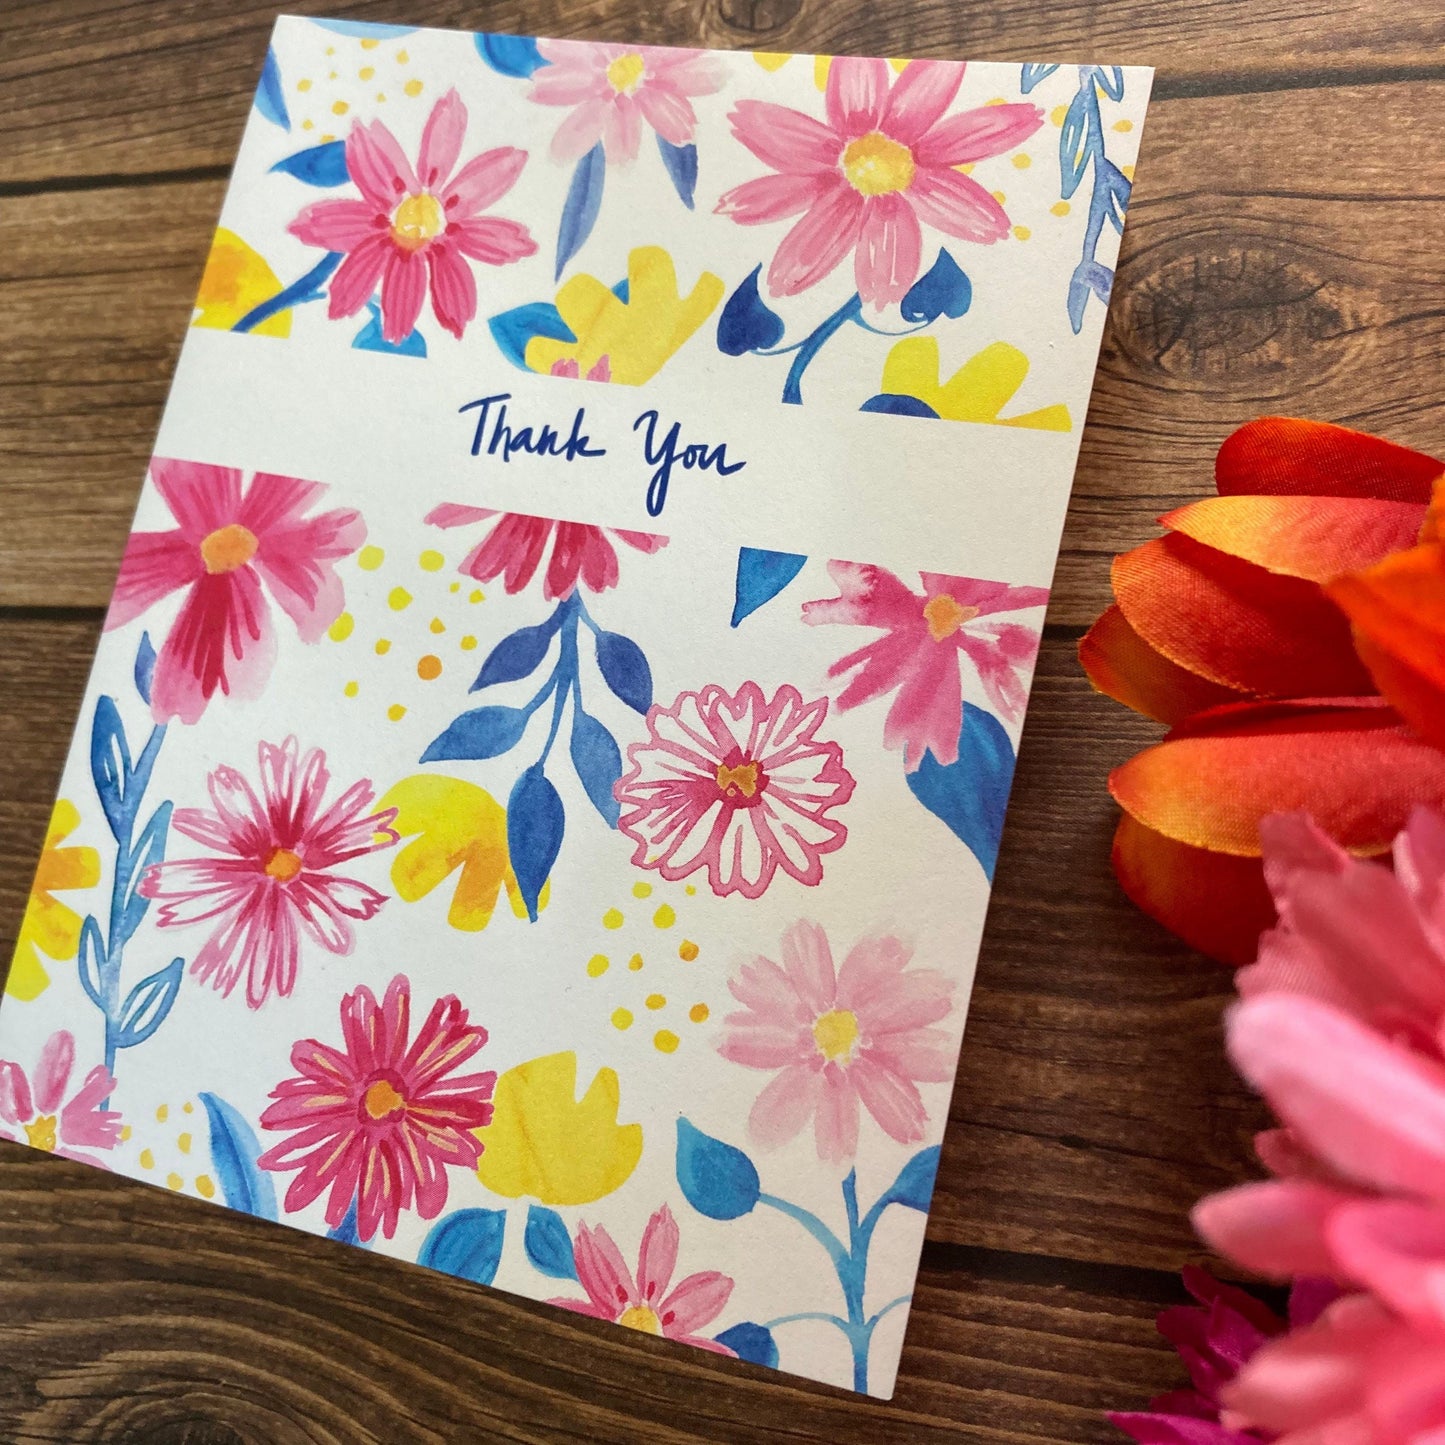 THANKS - Yellow Florals - bouquet, flowers, anytime appreciation, Eco-Friendly Notecards by Adriana Bergstrom (Adriprints)